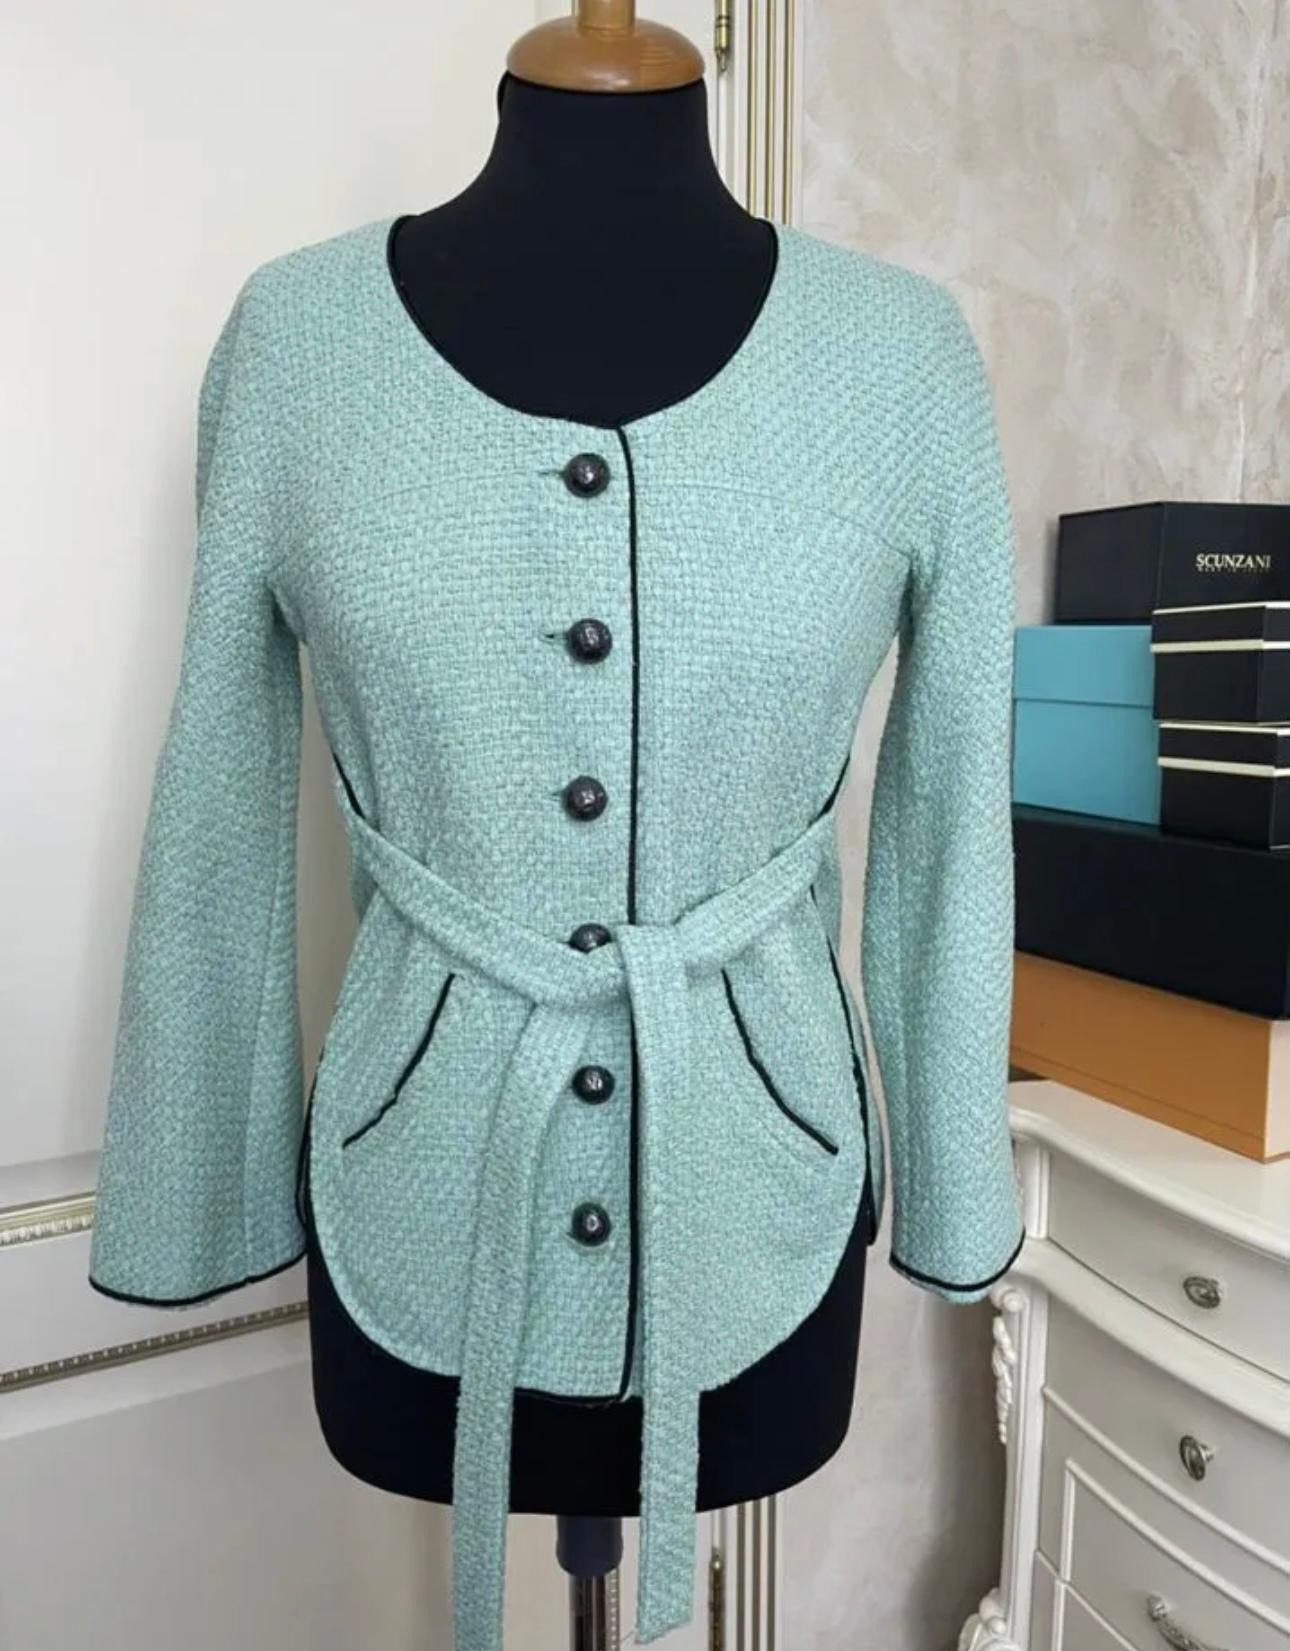 Chanel Vogue Cover Turquoise Tweed Jacket with Belt For Sale 5